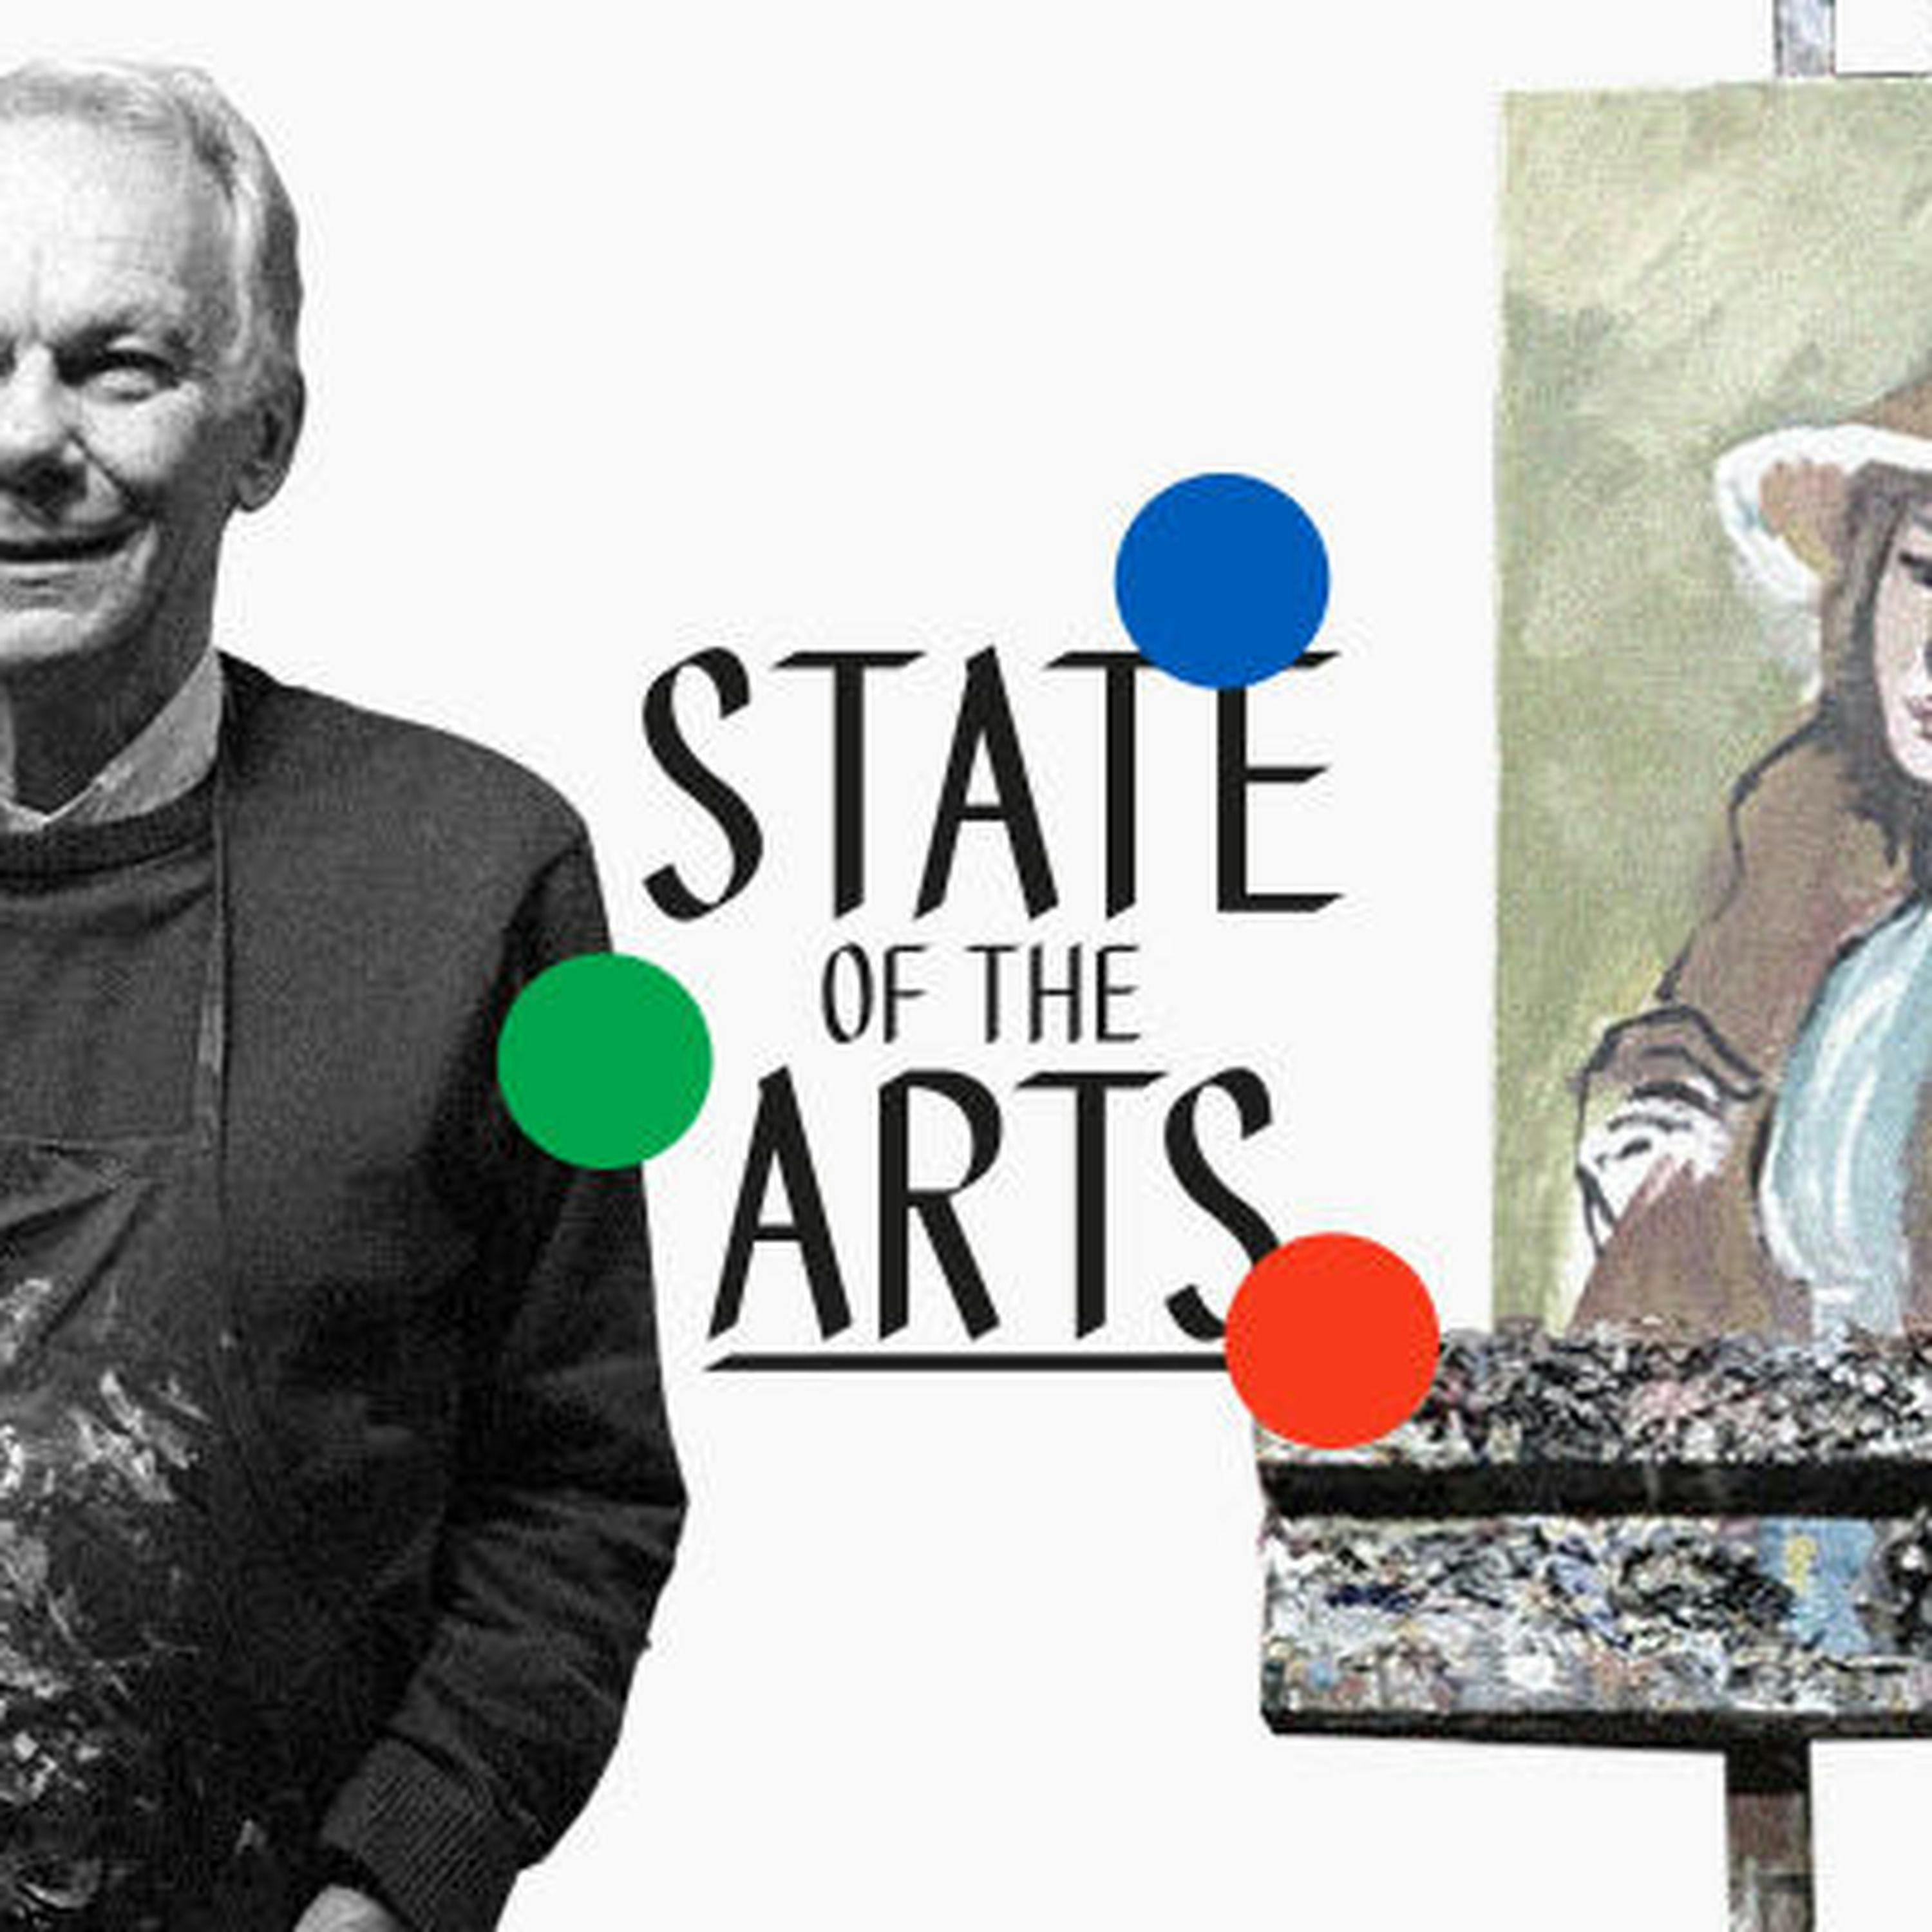 1: State of the Arts: The Art of Imitation